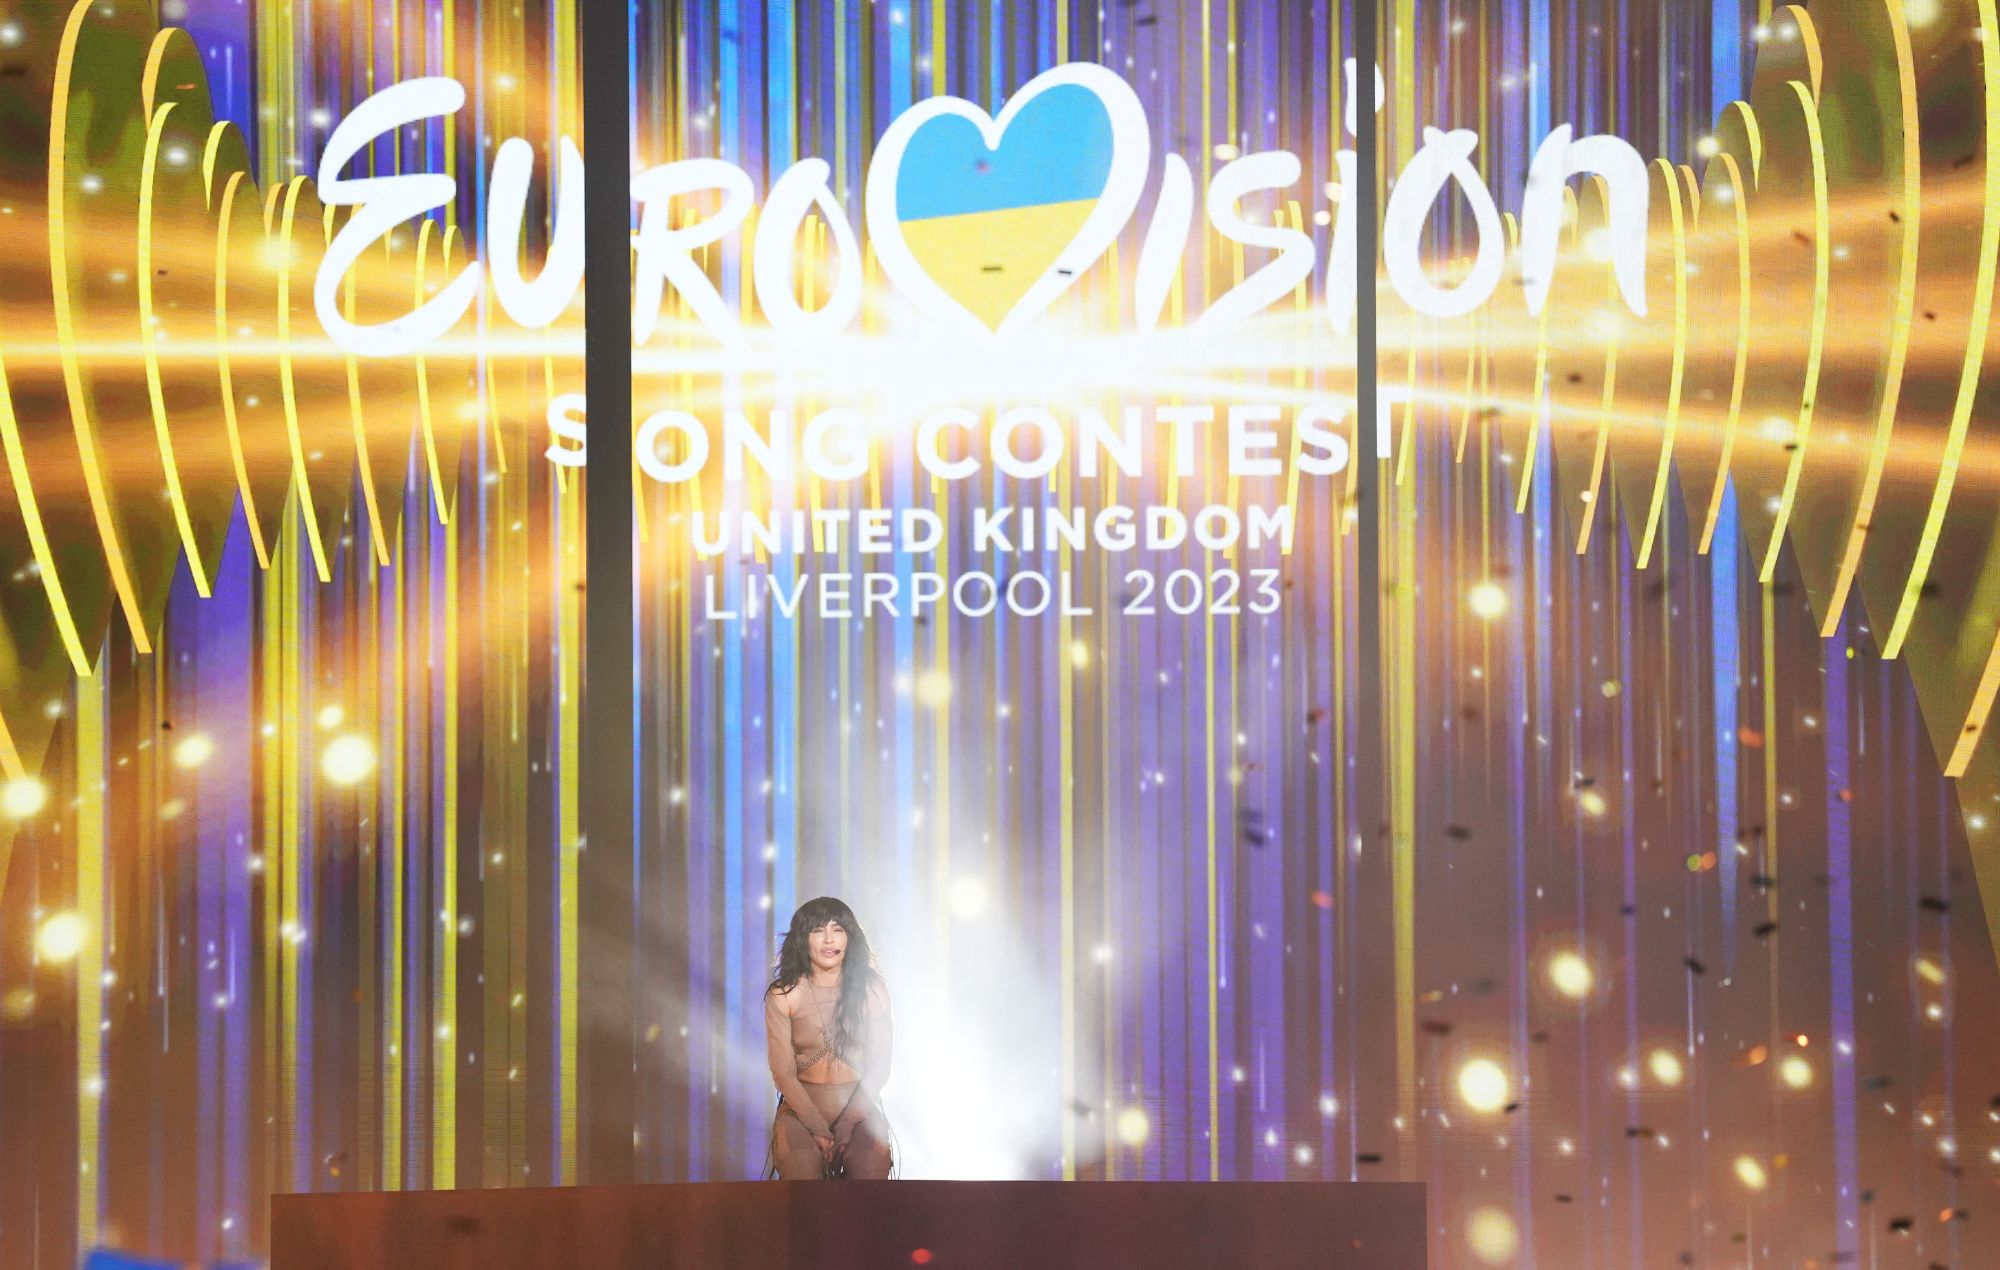 Eurovision makes Liverpool’s ‘United By Music’ slogan permanent